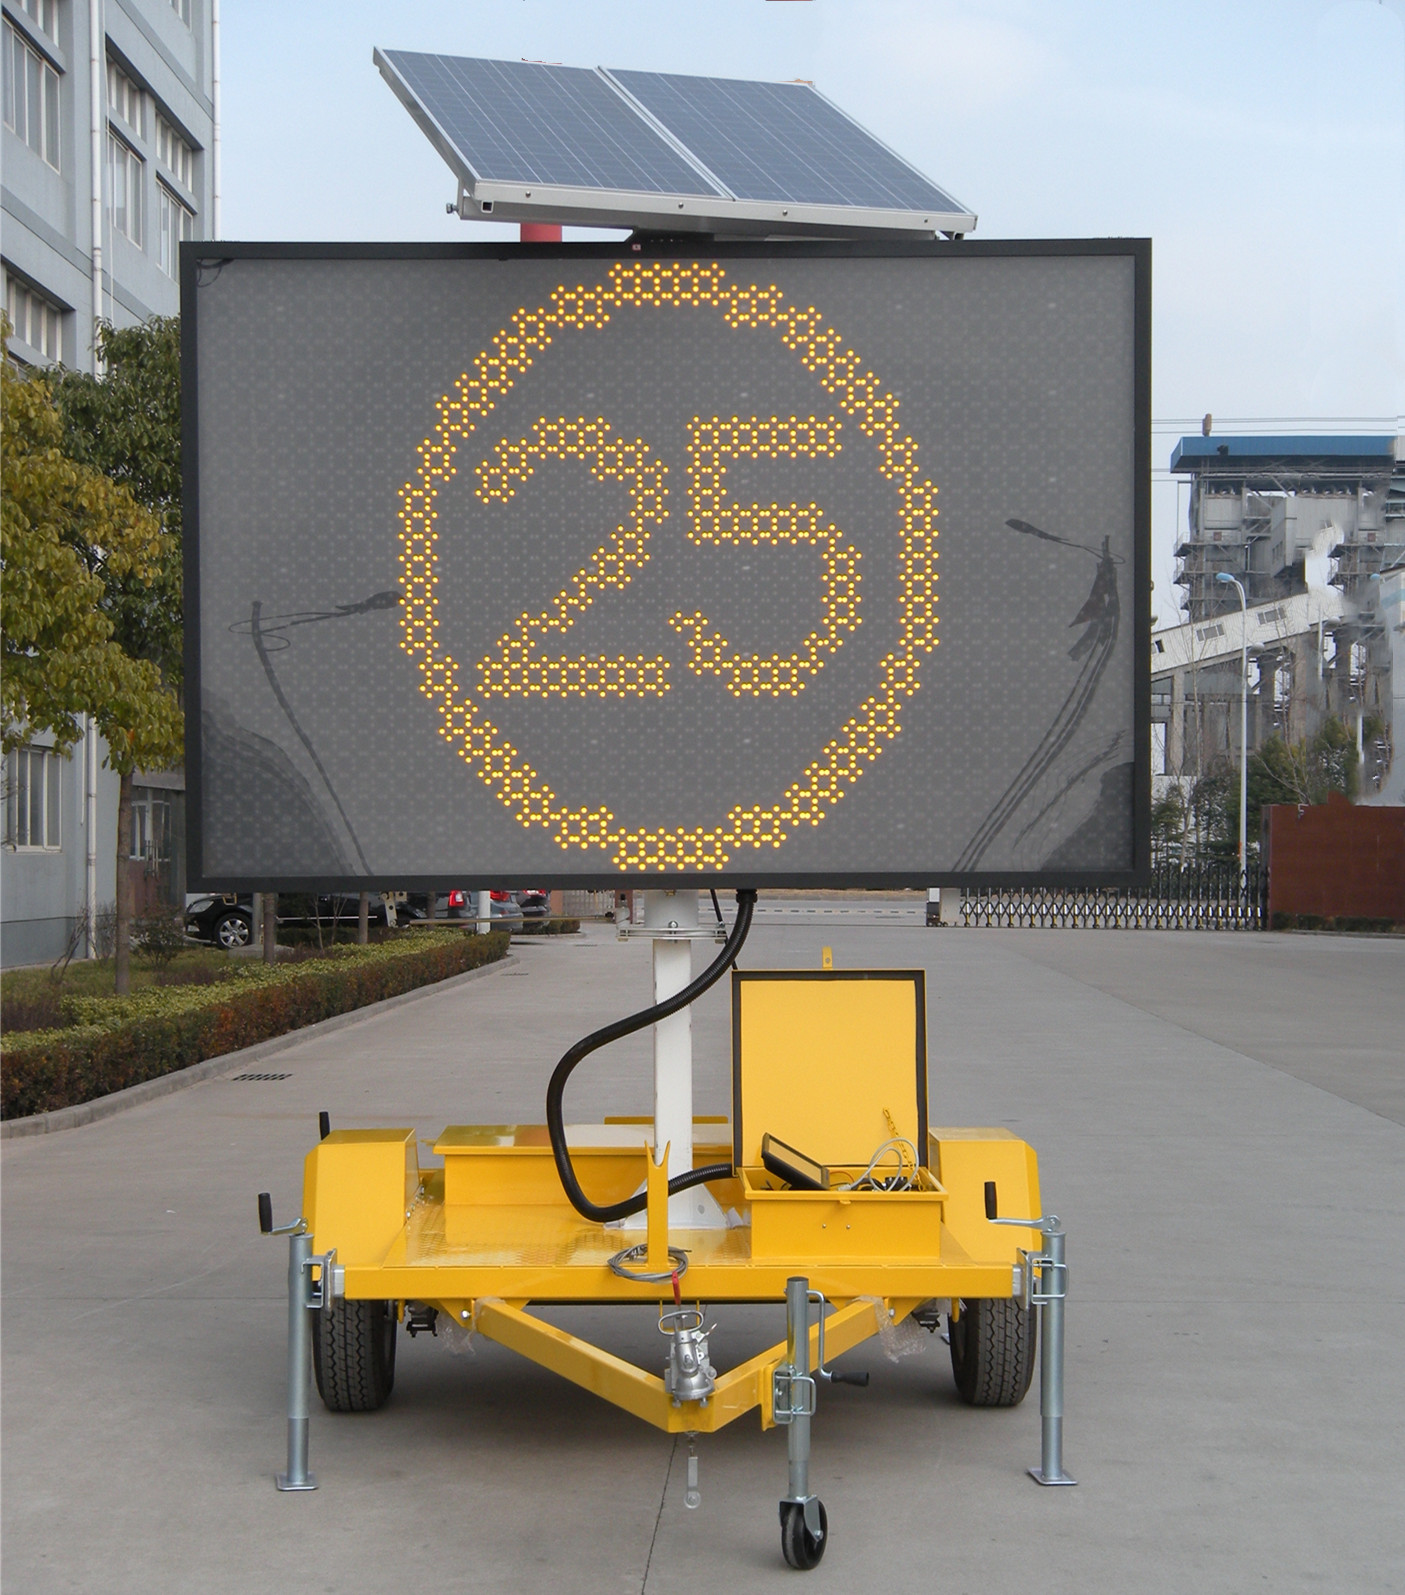 High Quality Large Size Amber Color Variable Message Traffic Sign with Both Onside and Remote Control